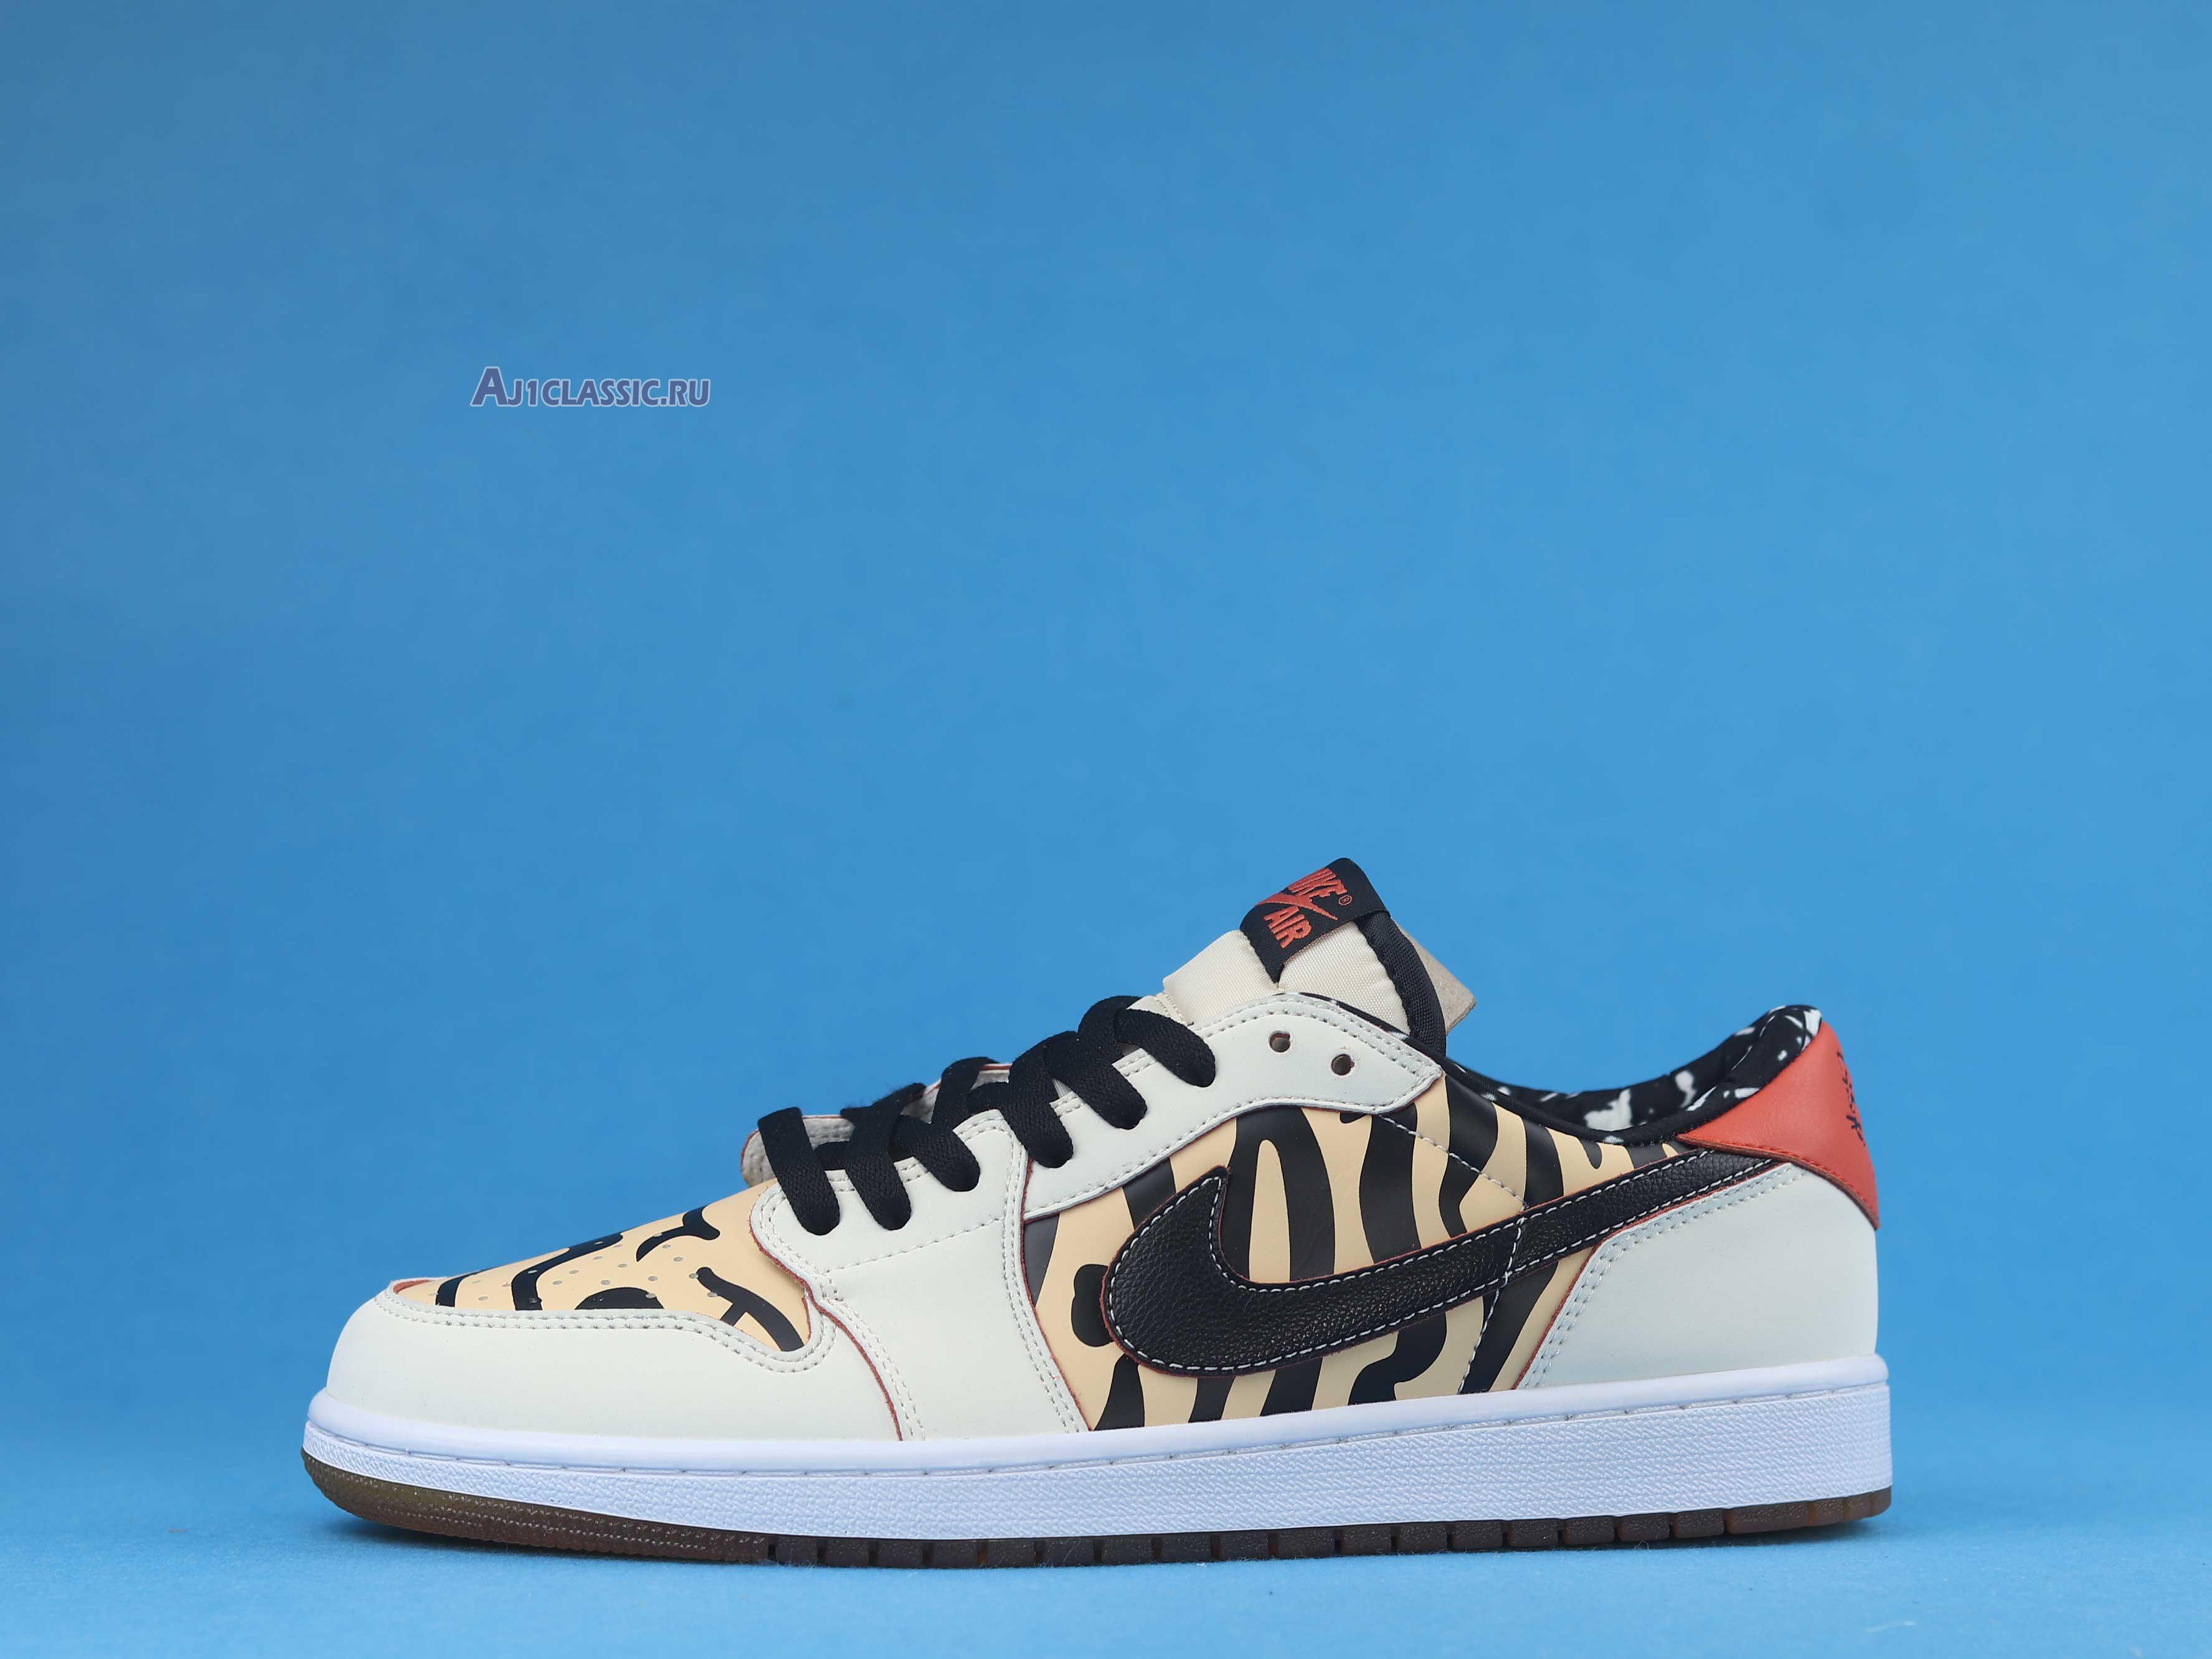 Air Jordan 1 Low OG "Chinese New Years - Year Of The Tiger" DH6932-100